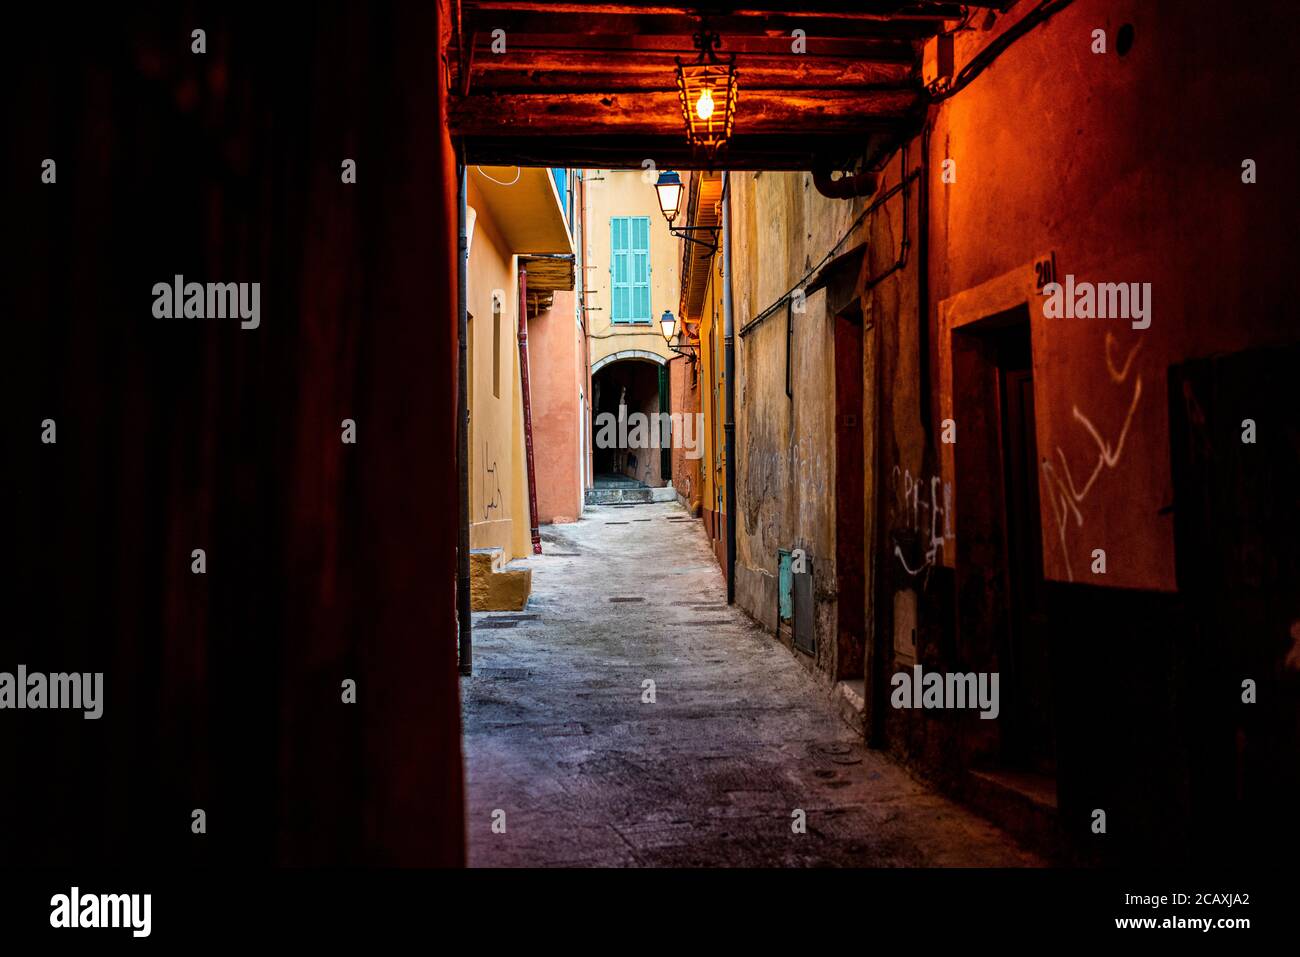 Dark foot pathway in the old city of Villefranche sur mer, a city near Nice in south of France Stock Photo